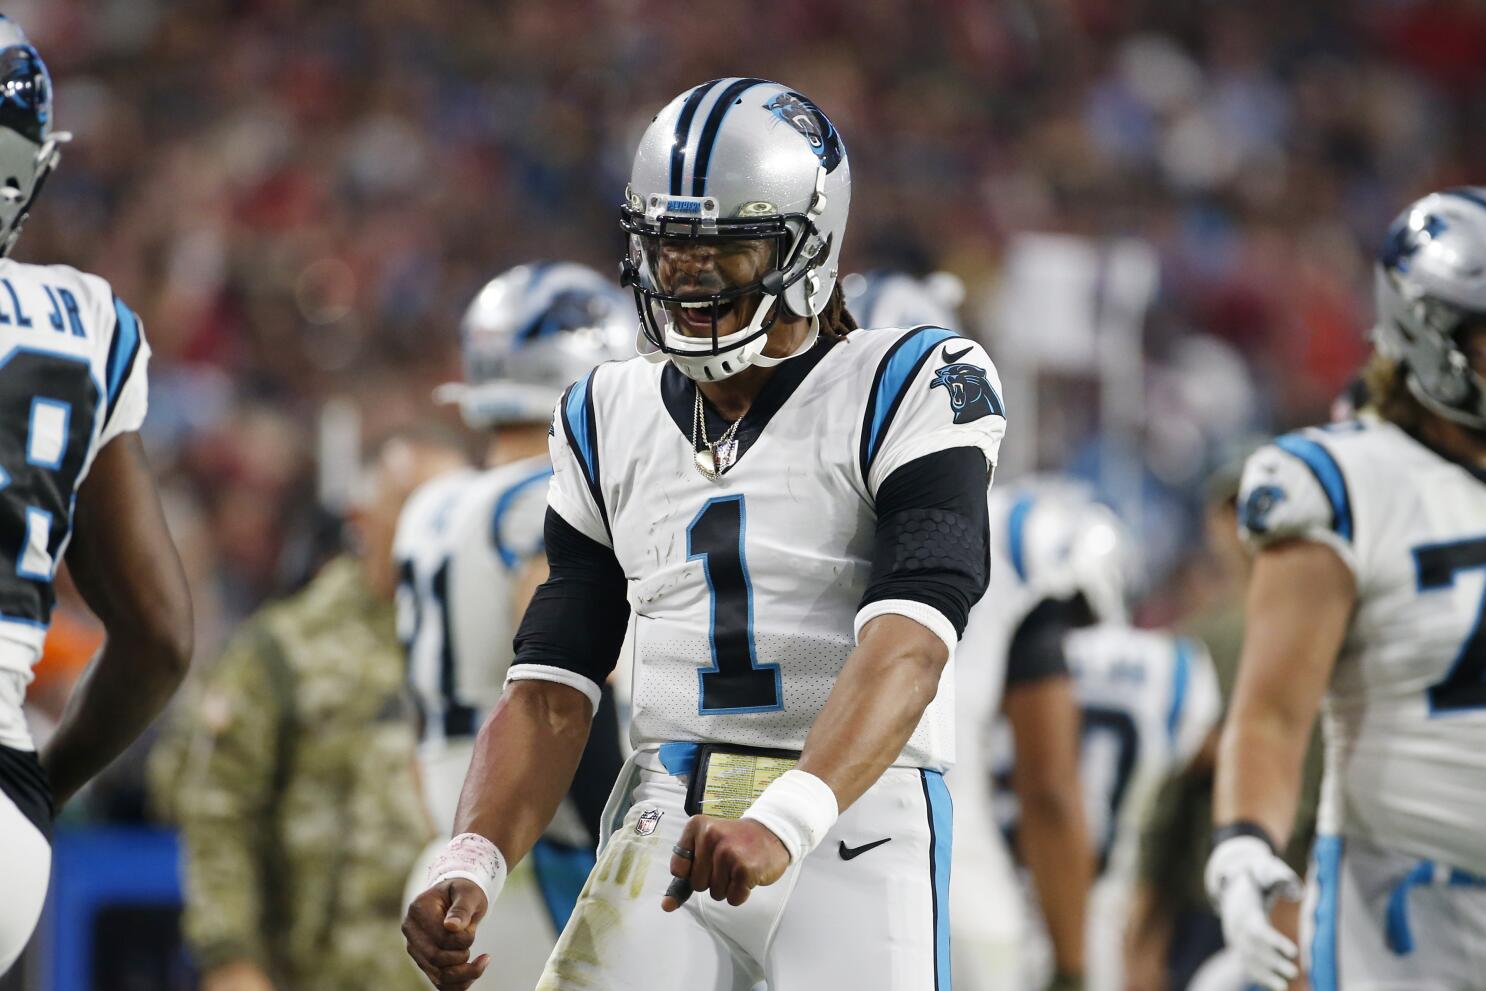 Has Cam Newton played his last game for the Panthers? 